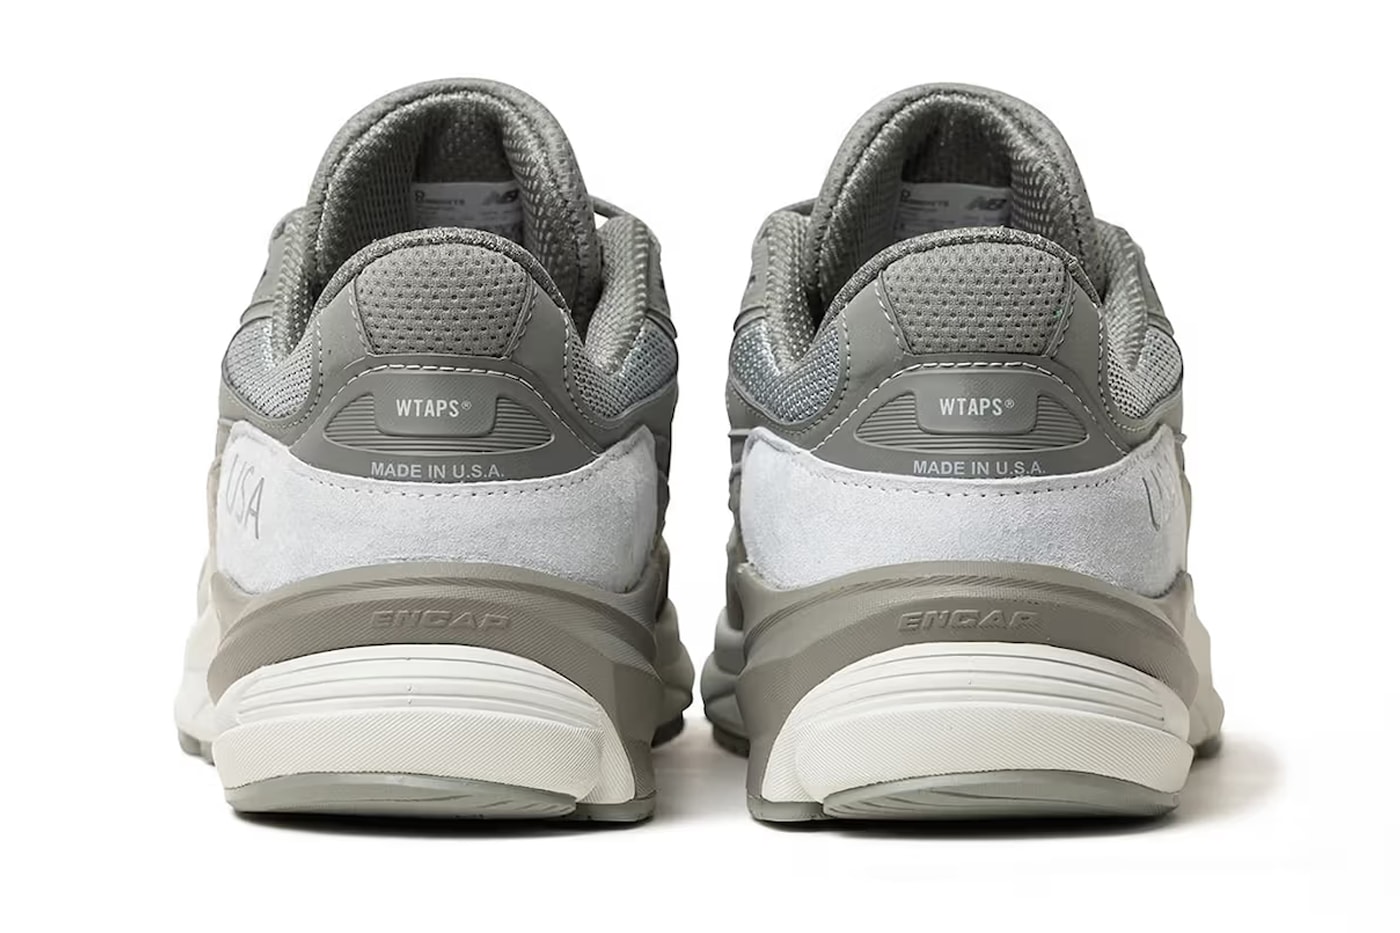 wtaps new balance 990v6 made in usa grey white collaboration official release date info photos price store list buying guide 